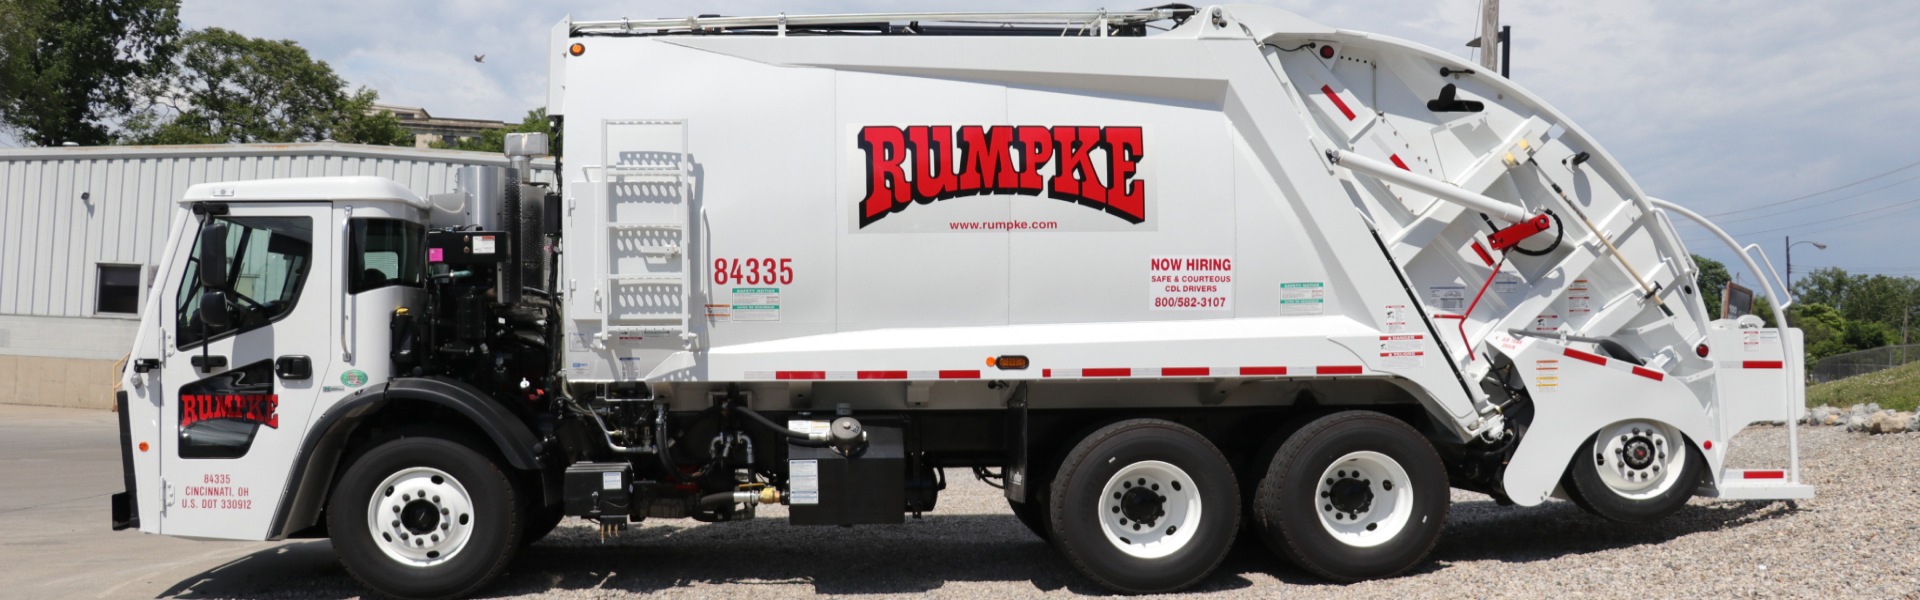 Rumpke Garbage Truck For Commercial Garbage Services